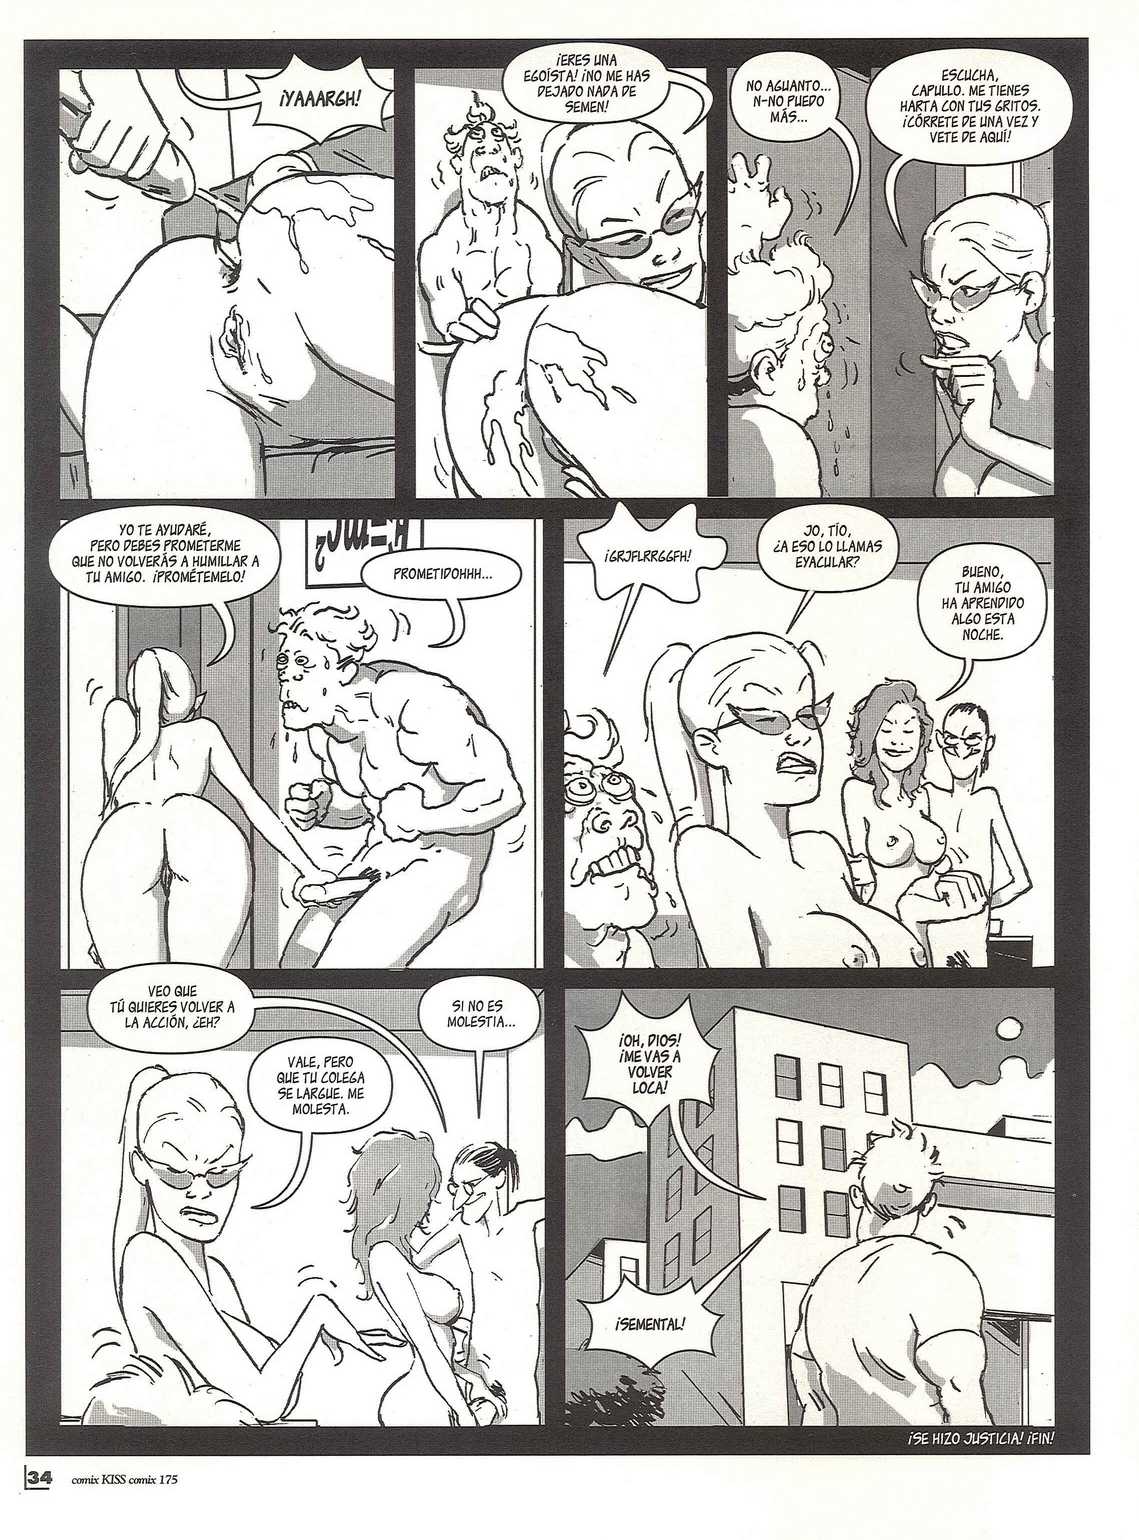 Kiss comix 175 image number 33